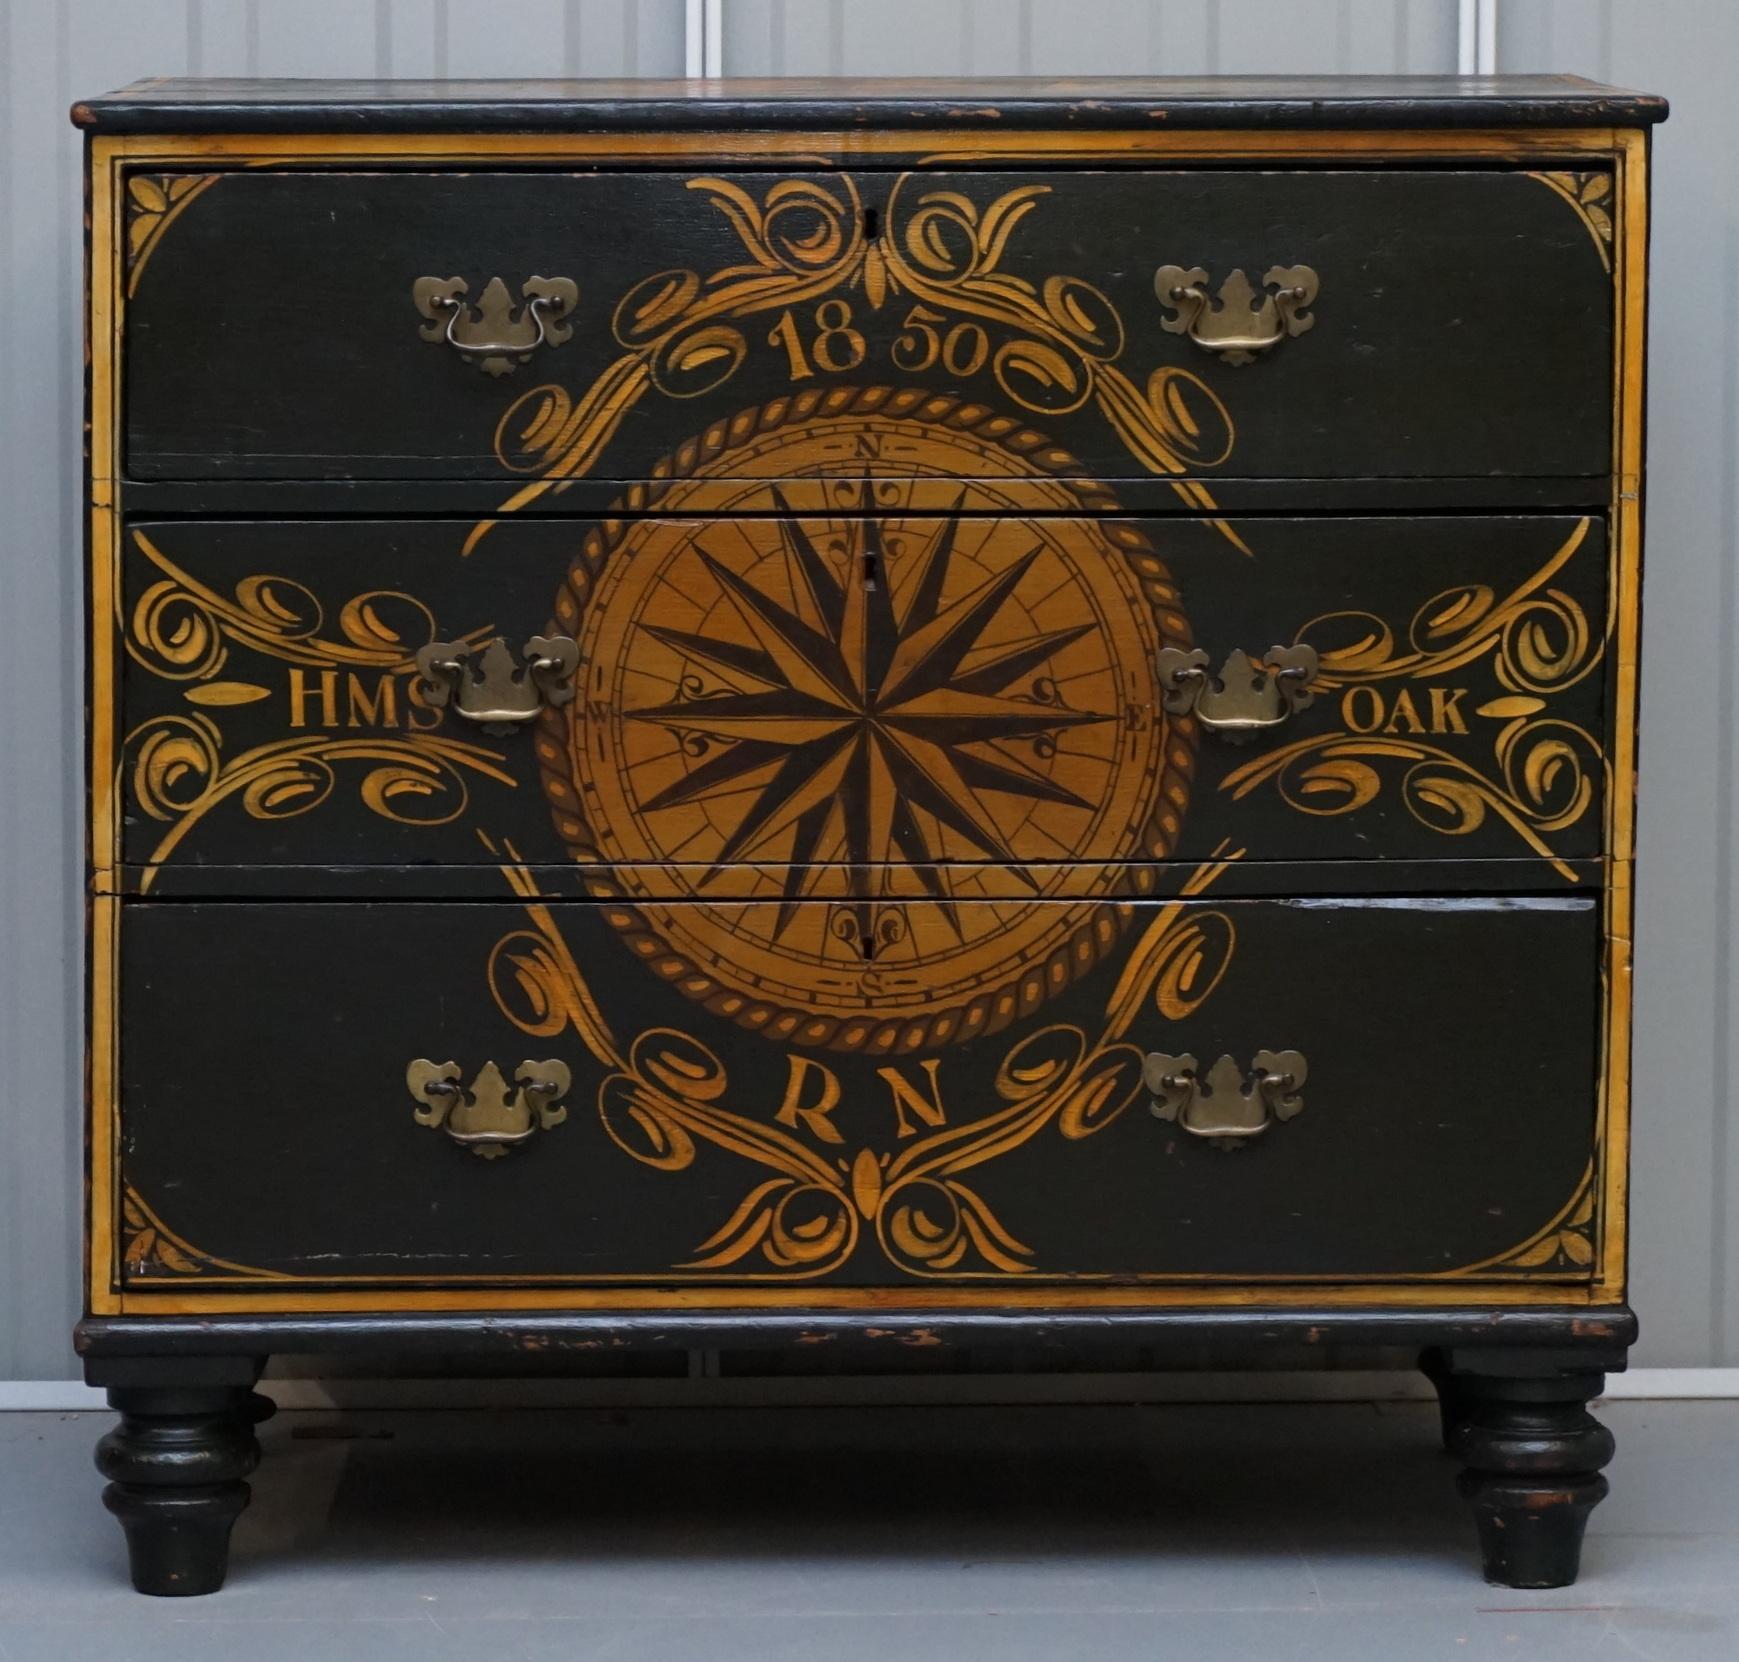 Wimbledon-Furniture

Wimbledon-Furniture is delighted to offer for sale this stunning Victorian hand painted chest of drawers made from the timber of HMS Royal oak which was broken up in 1850

Please note the delivery fee listed is just a guide,